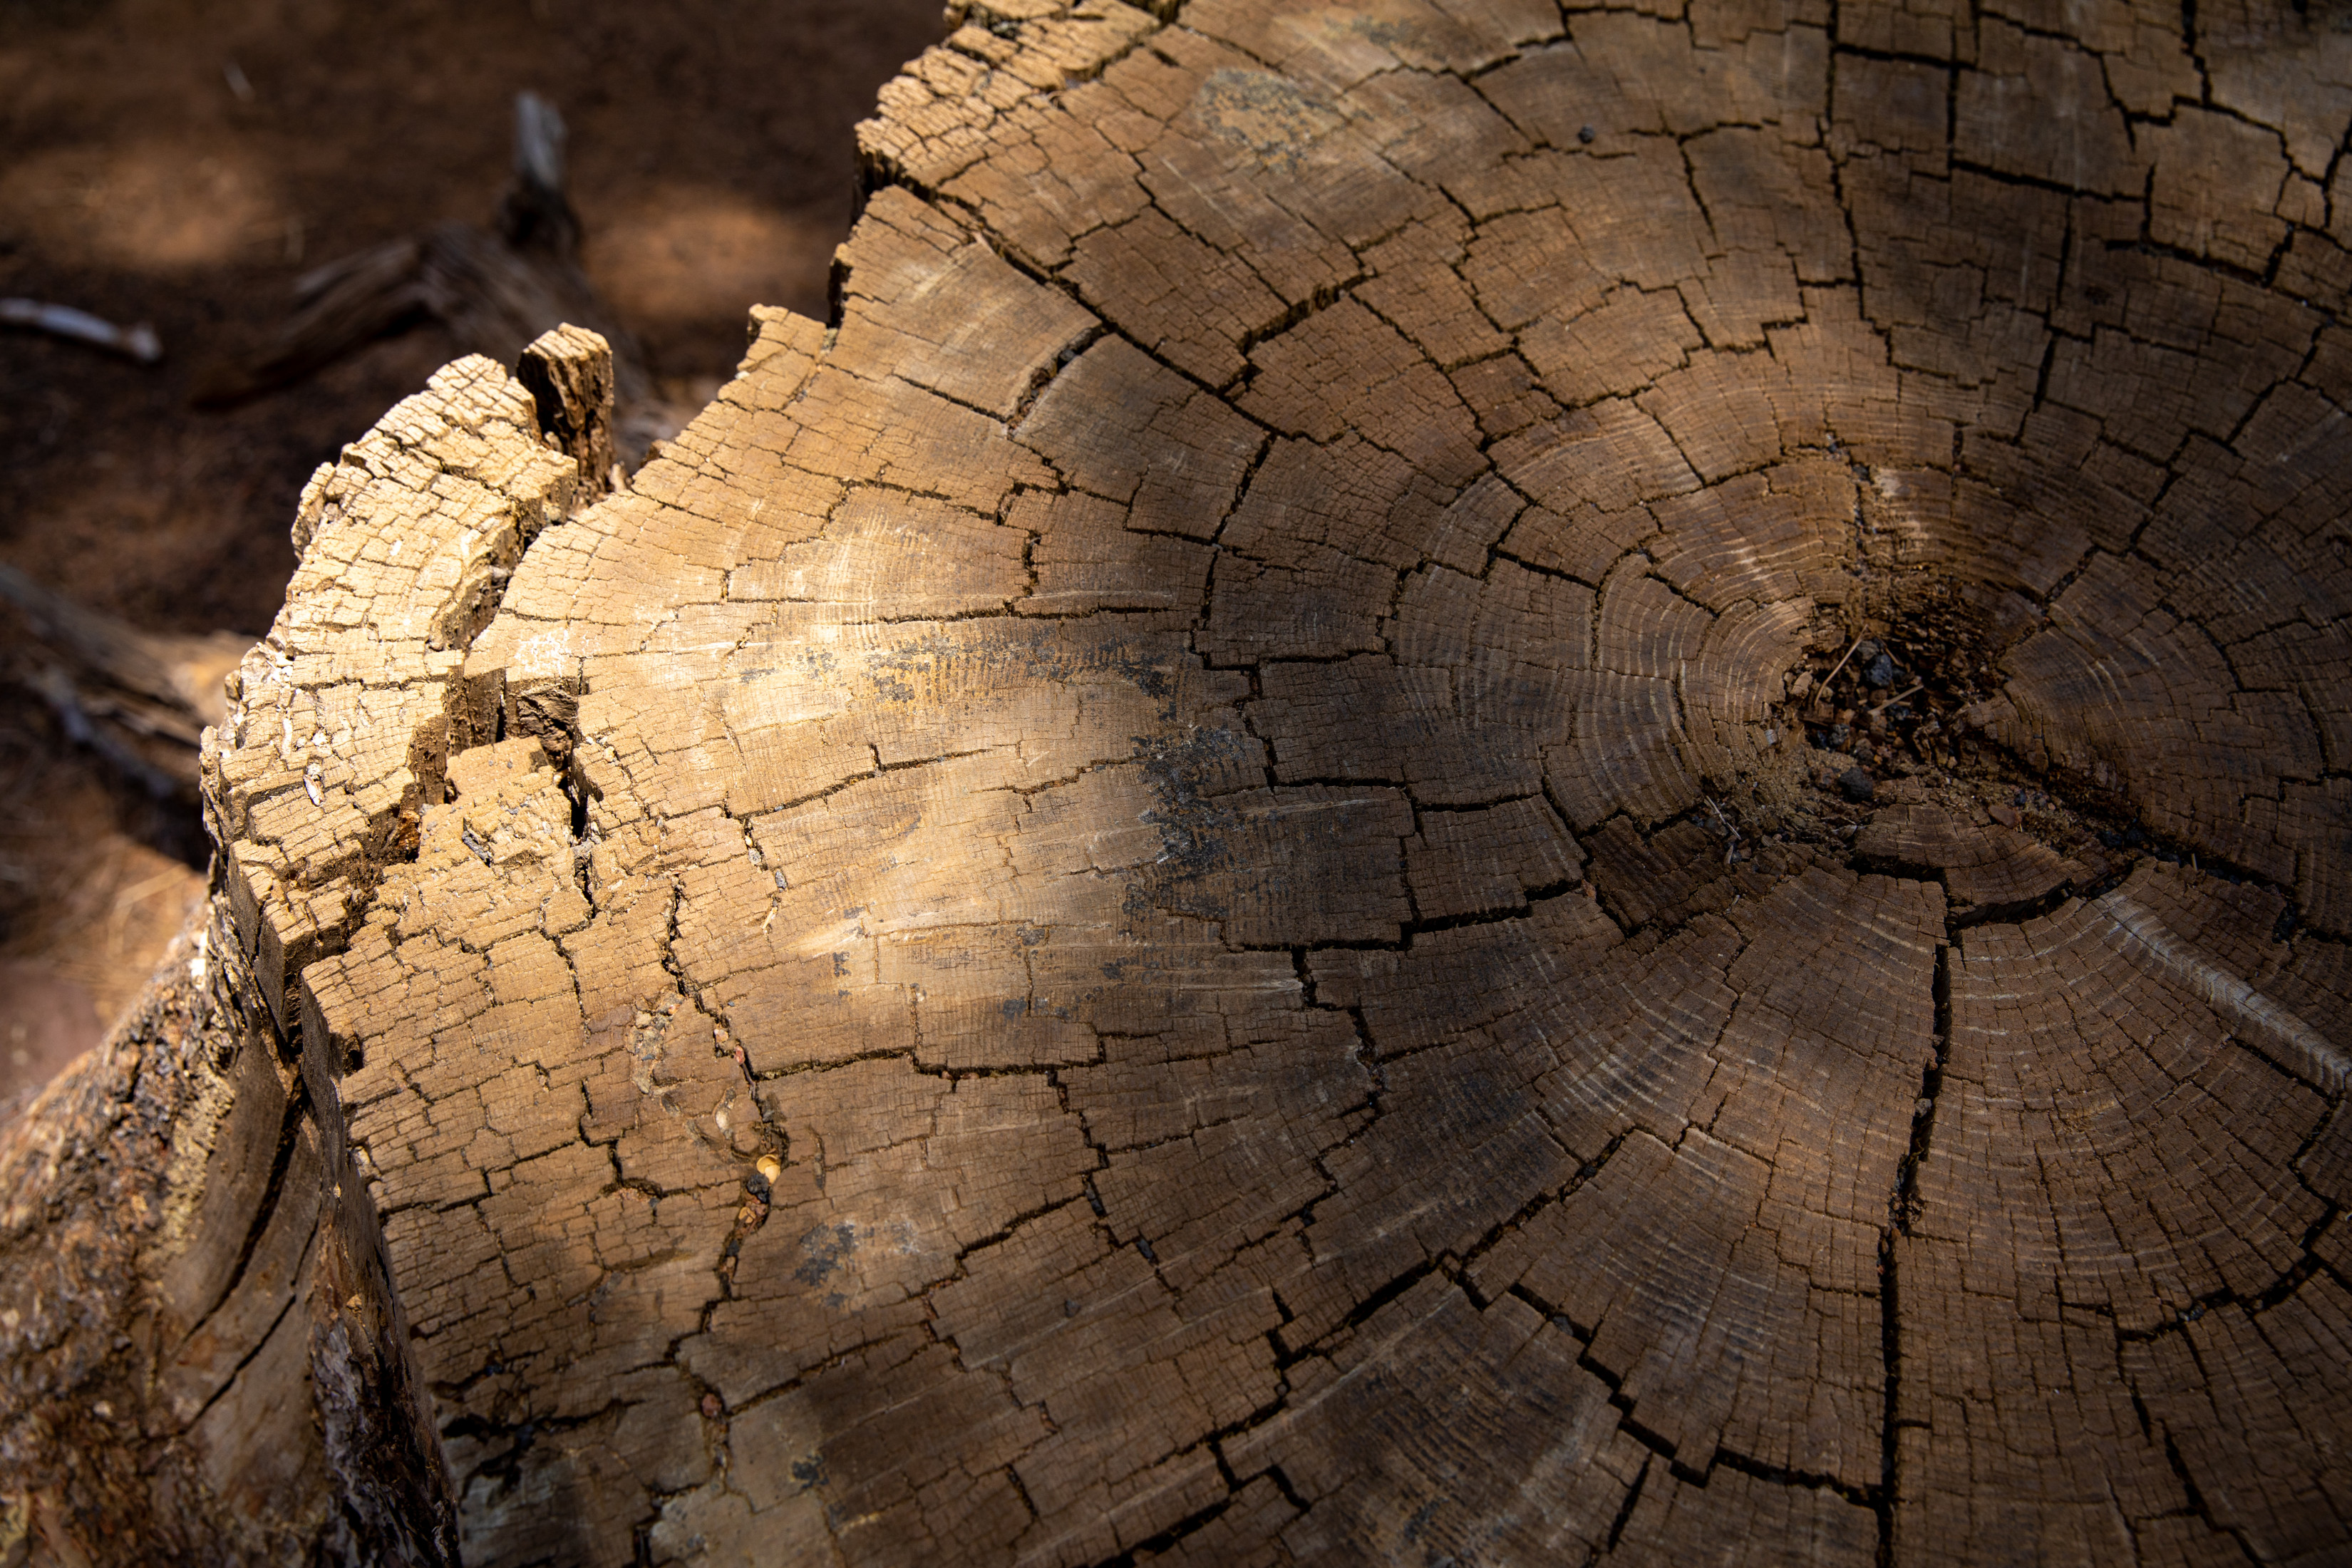 Close-up of a tree stump, showing cracks and gaps in the weathered wood.